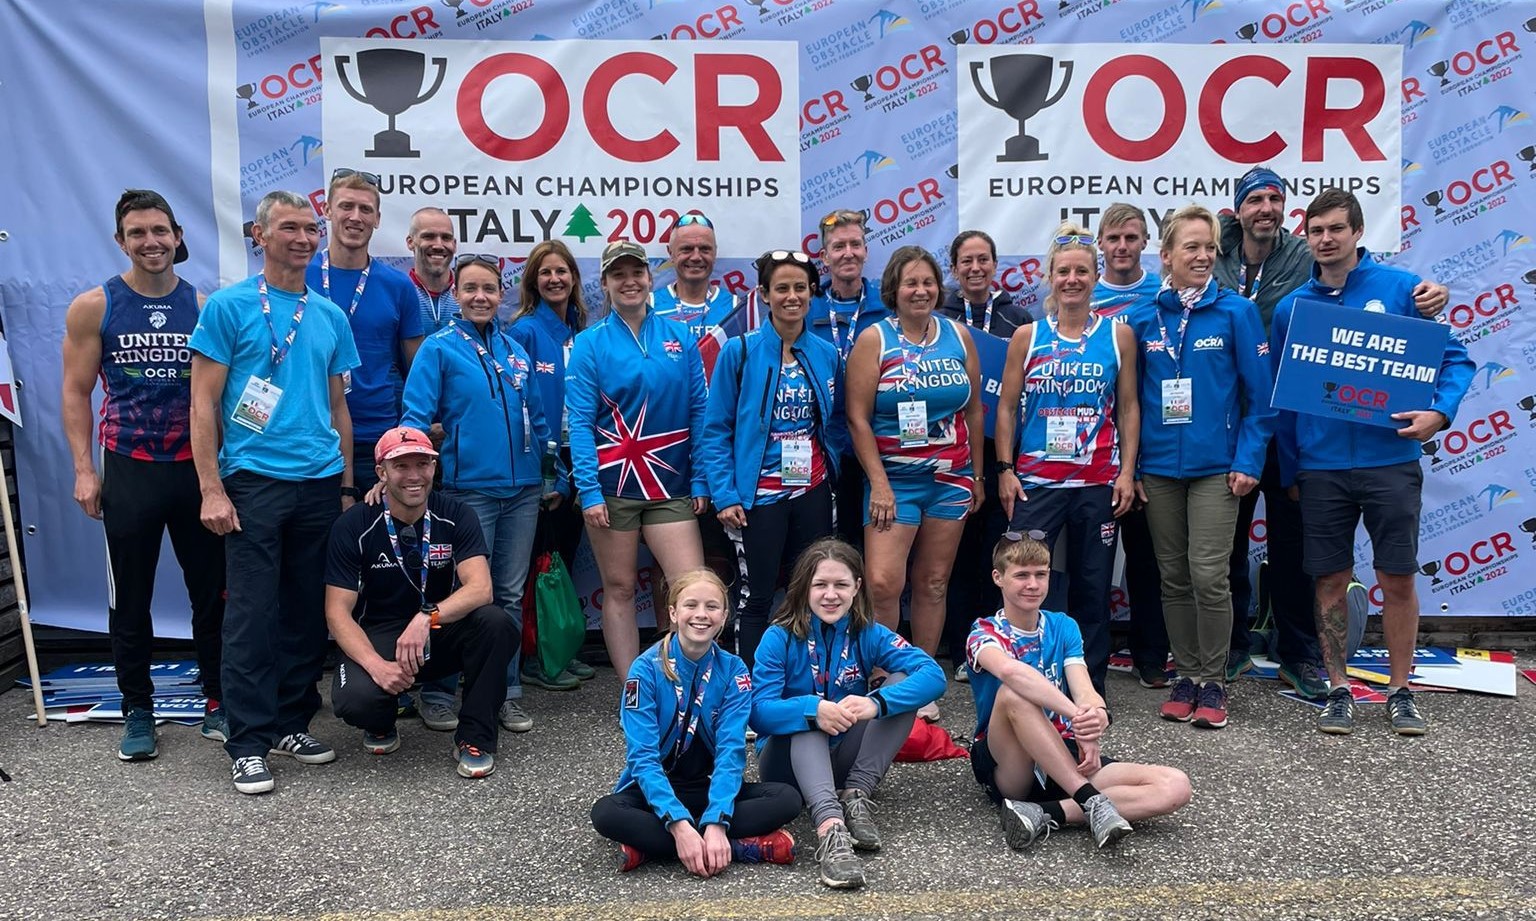 Team UK at the OCR European Championships